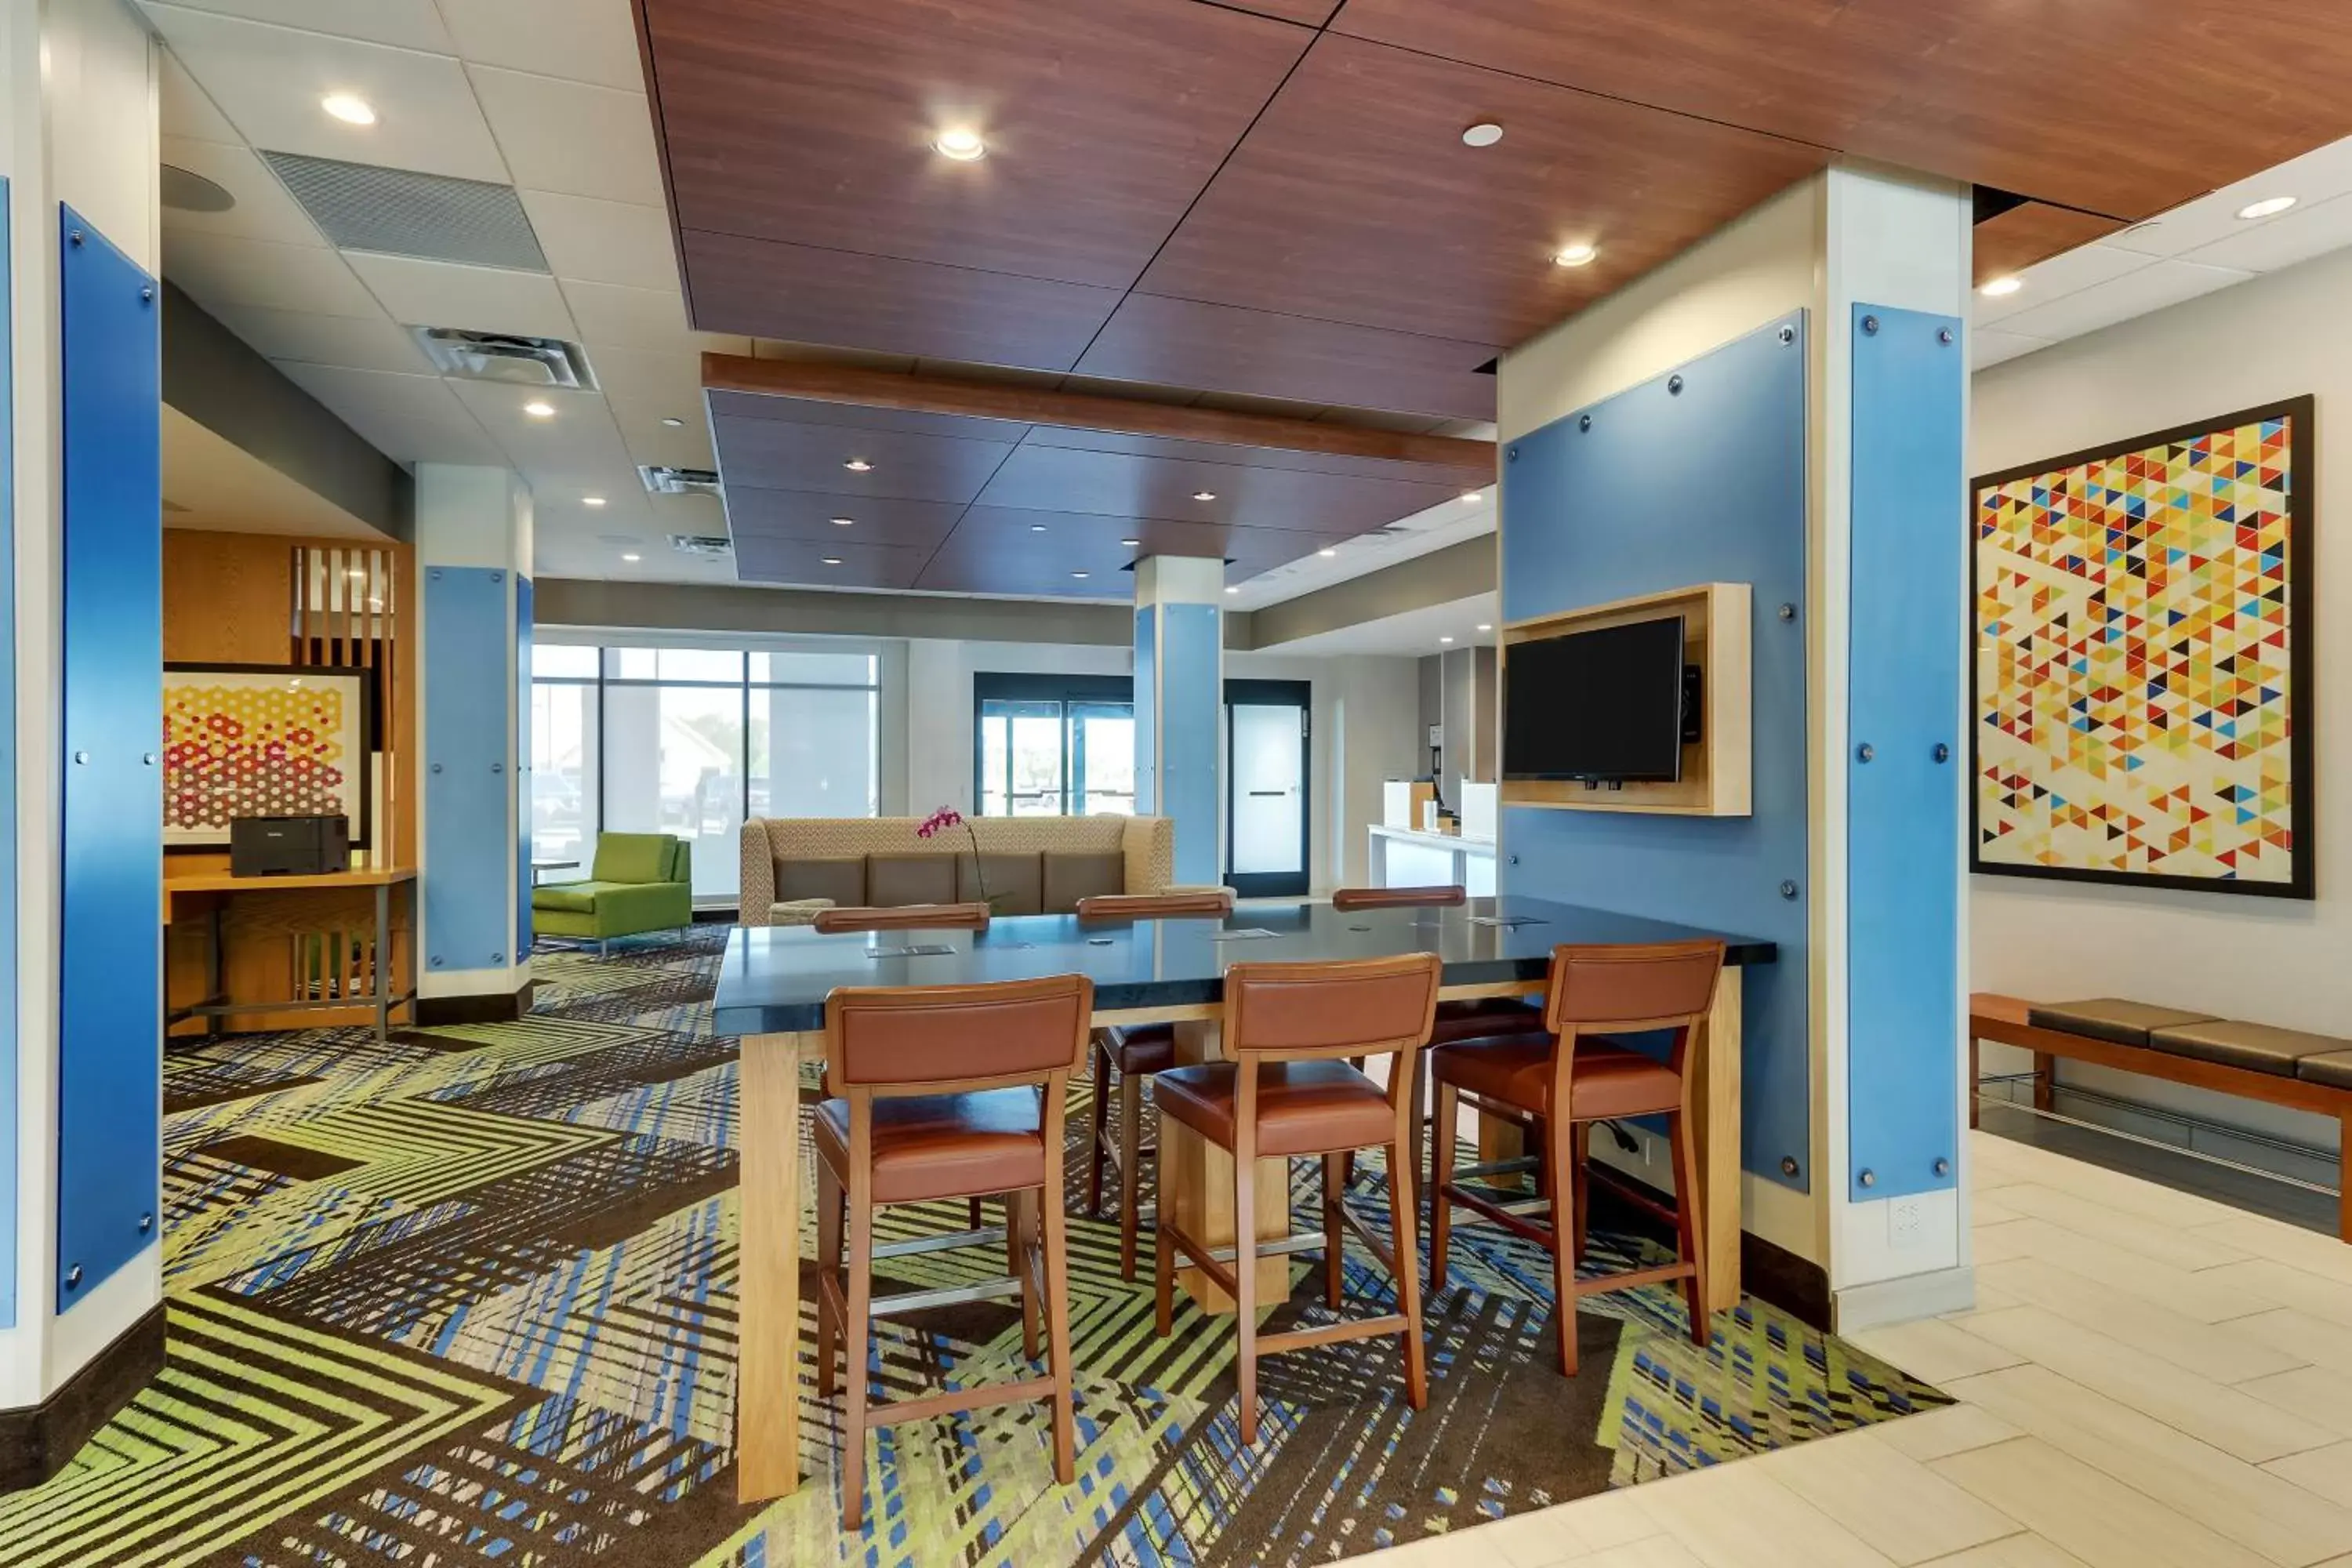 Property building in Holiday Inn Express - Wilmington - Porters Neck, an IHG Hotel